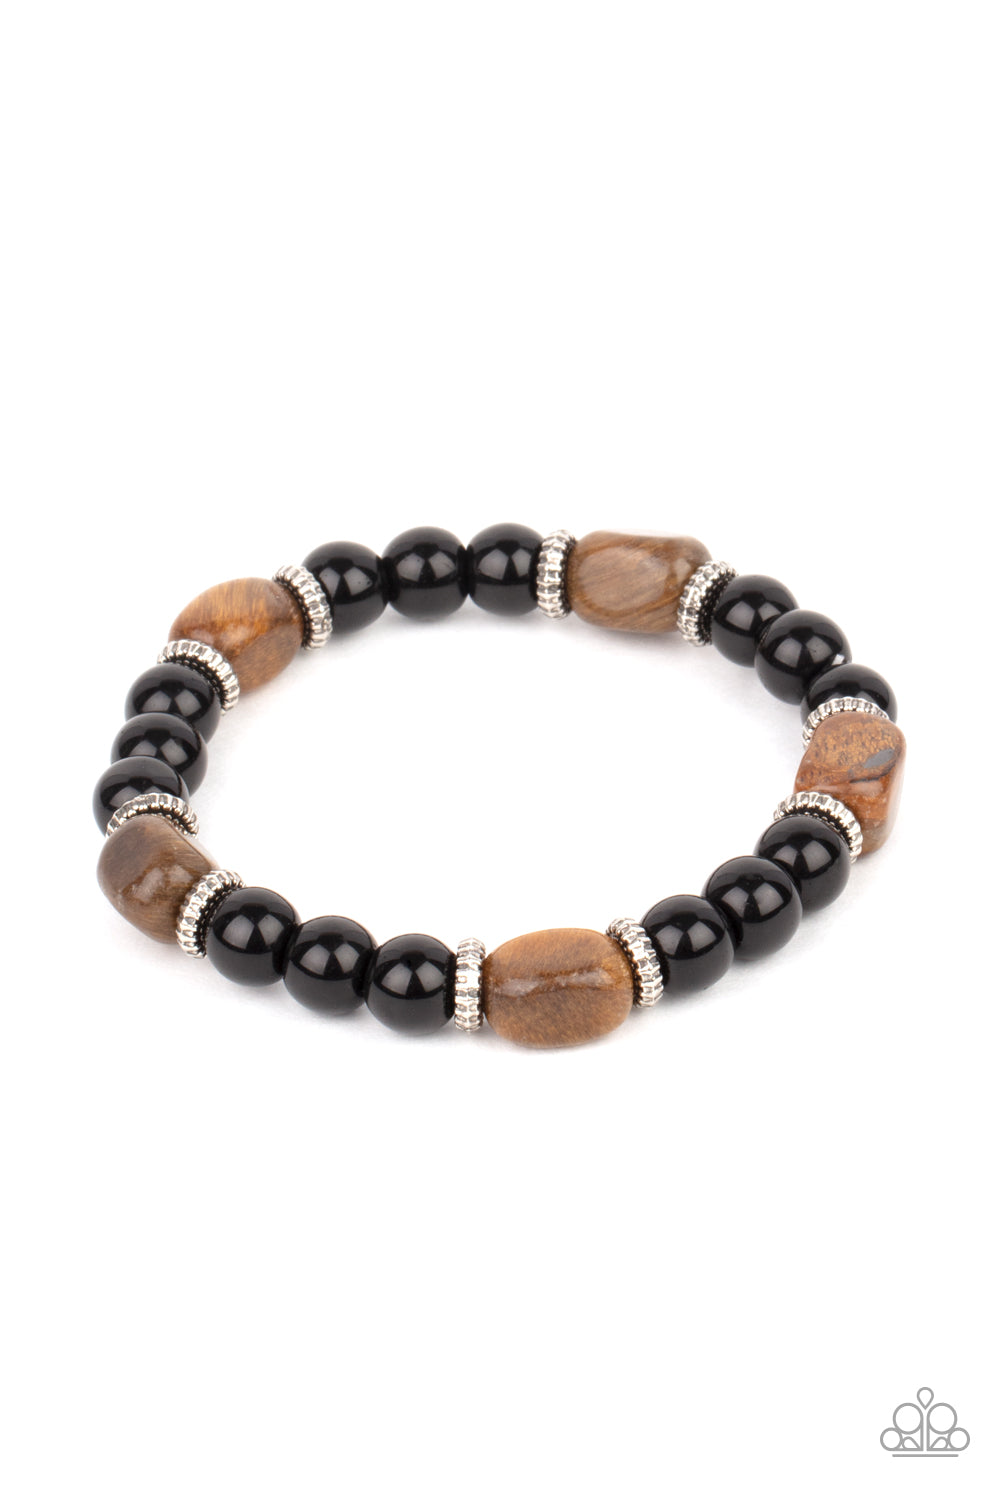 Unity Brown Urban Bracelet - Paparazzi Accessories  Infused with dainty silver accents, glassy black and tiger's eye stone beads are threaded along a stretchy band around the wrist for a stackable seasonal look.  All Paparazzi Accessories are lead free and nickel free!  Sold as one individual bracelet.